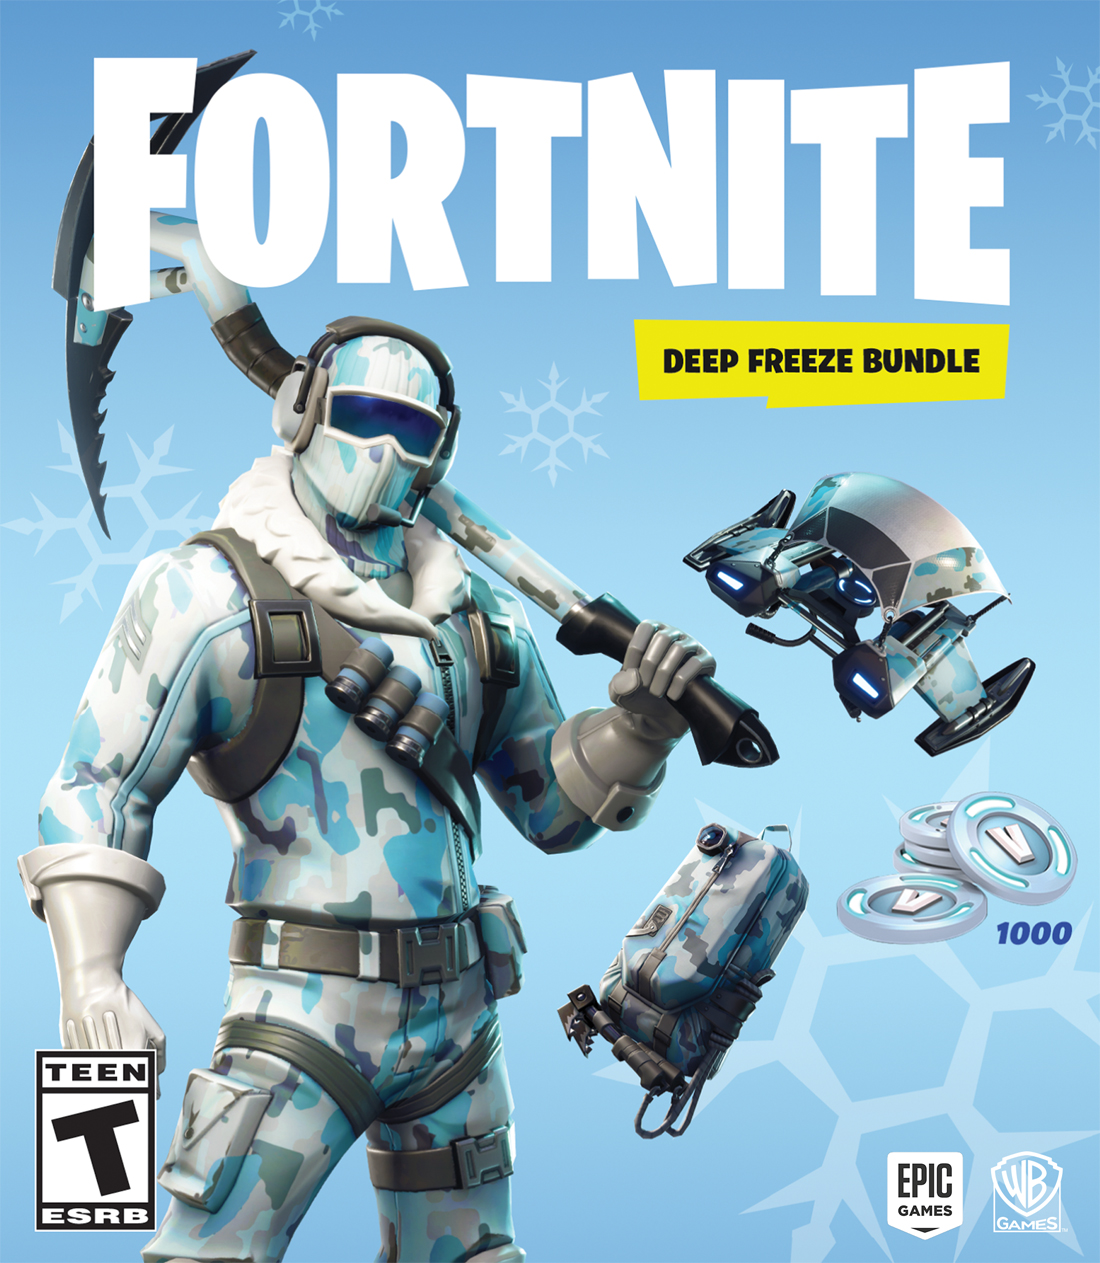 Fortnite: Deep Freeze Bundle with exclusive in-game content launching in November